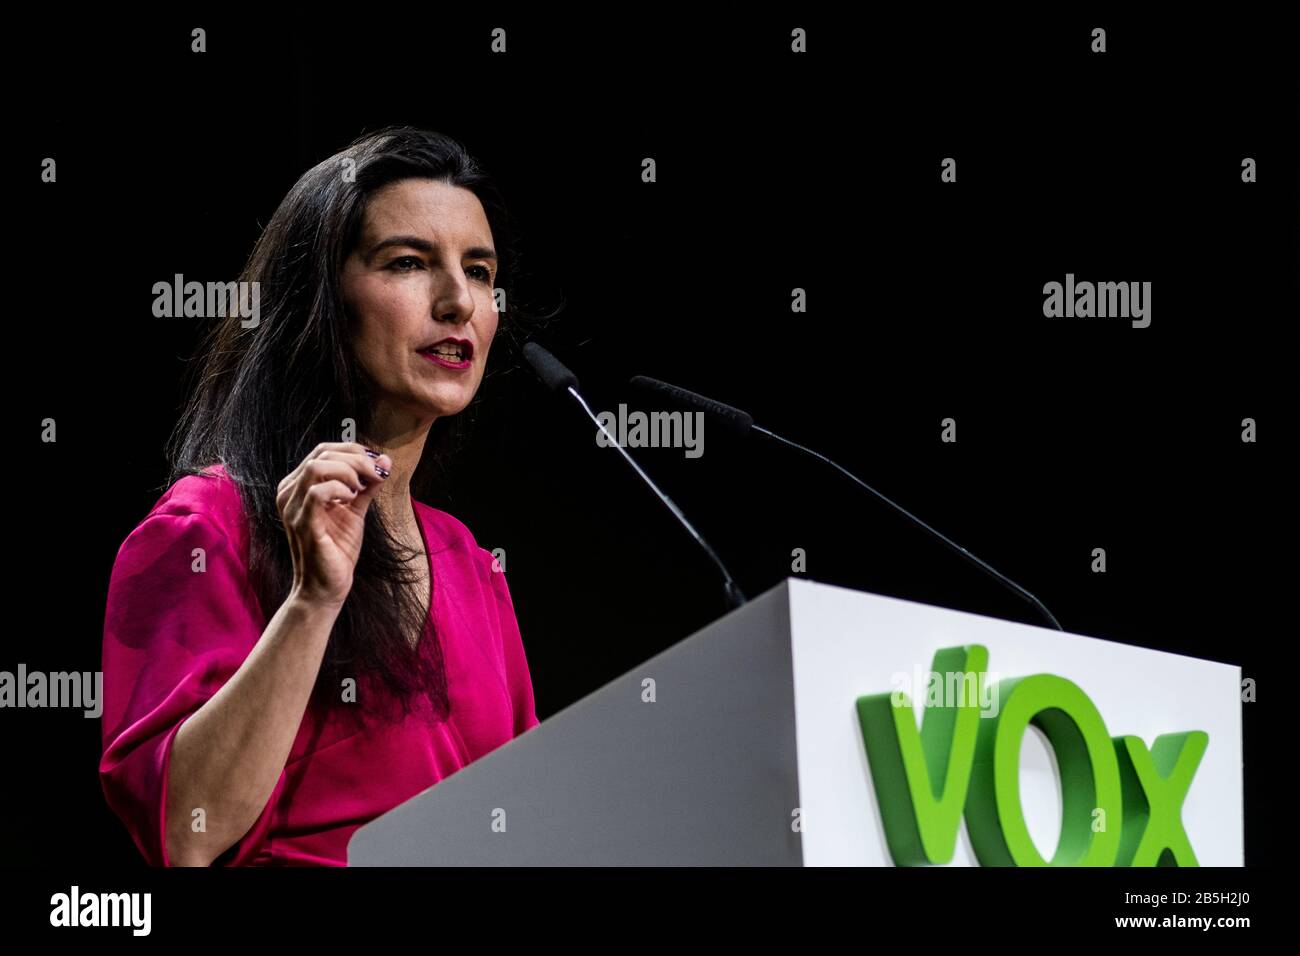 Madrid, Spain. 08th Mar, 2020. Madrid, Spain. March 8, 2020. Rocio Monasterio of far-right party VOX speaking during the 'Vistalegre III' rally, coinciding with the International Women's Day. Credit: Marcos del Mazo/Alamy Live News Stock Photo